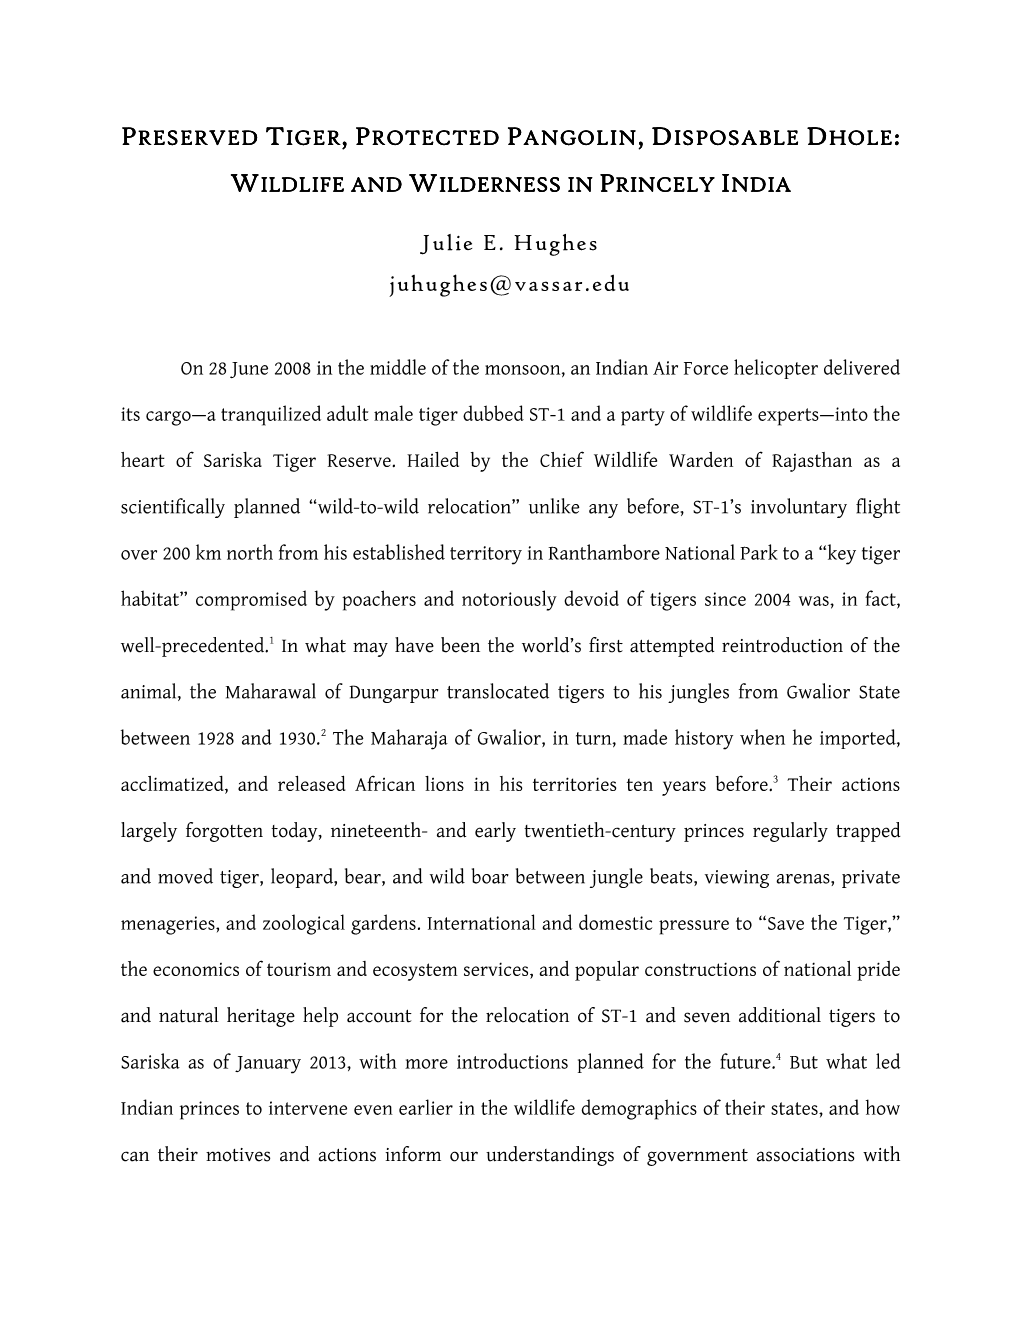 Julie Hughes, “Environmental Status and Wild Boar in Princely India,” in K